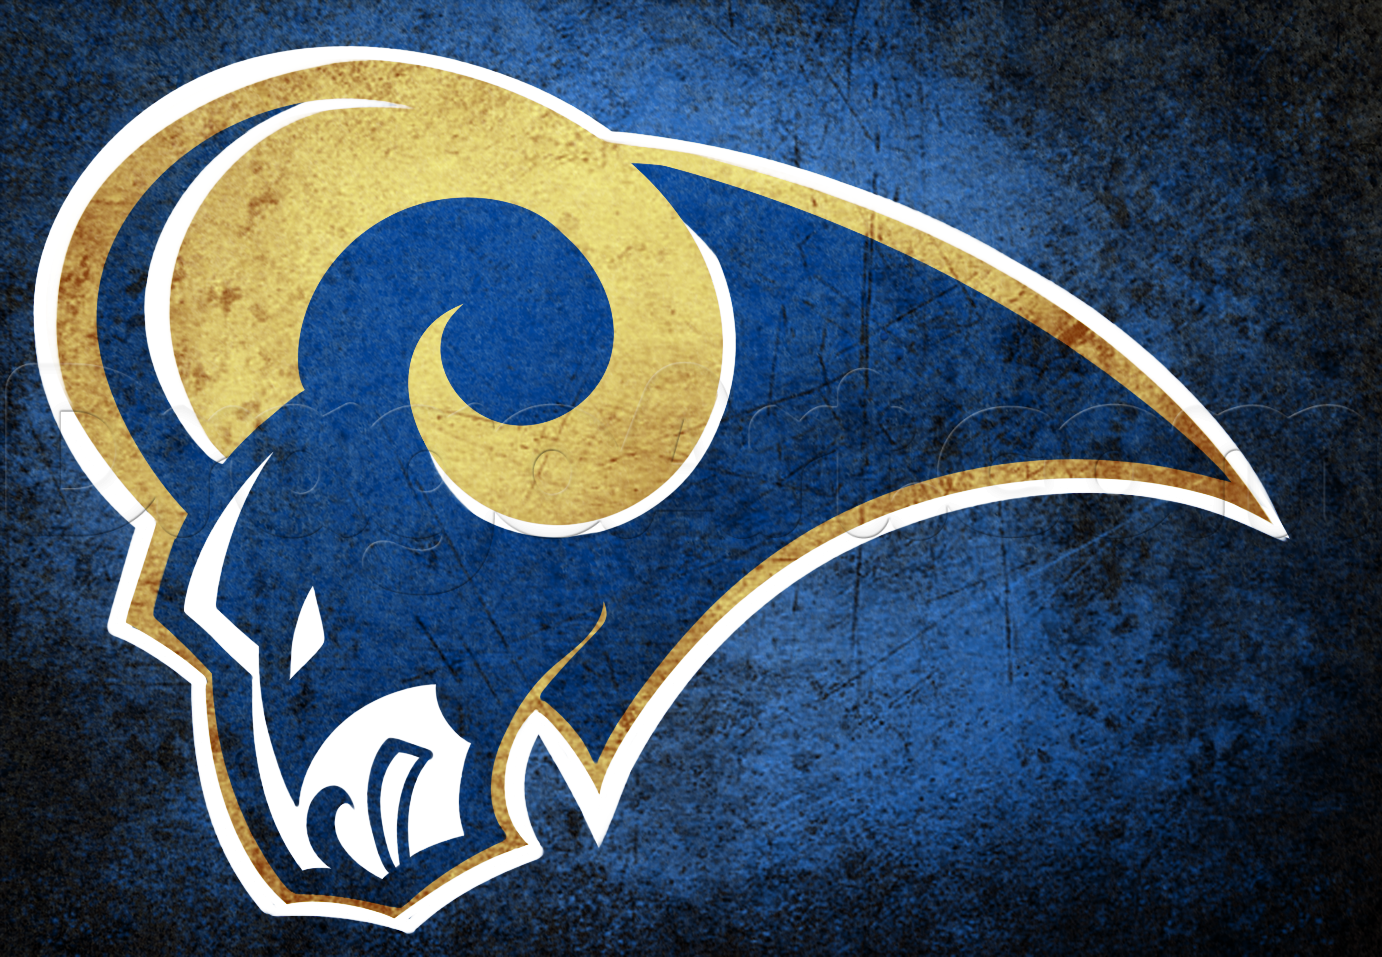 Buy St. Louis Rams Tickets Today!